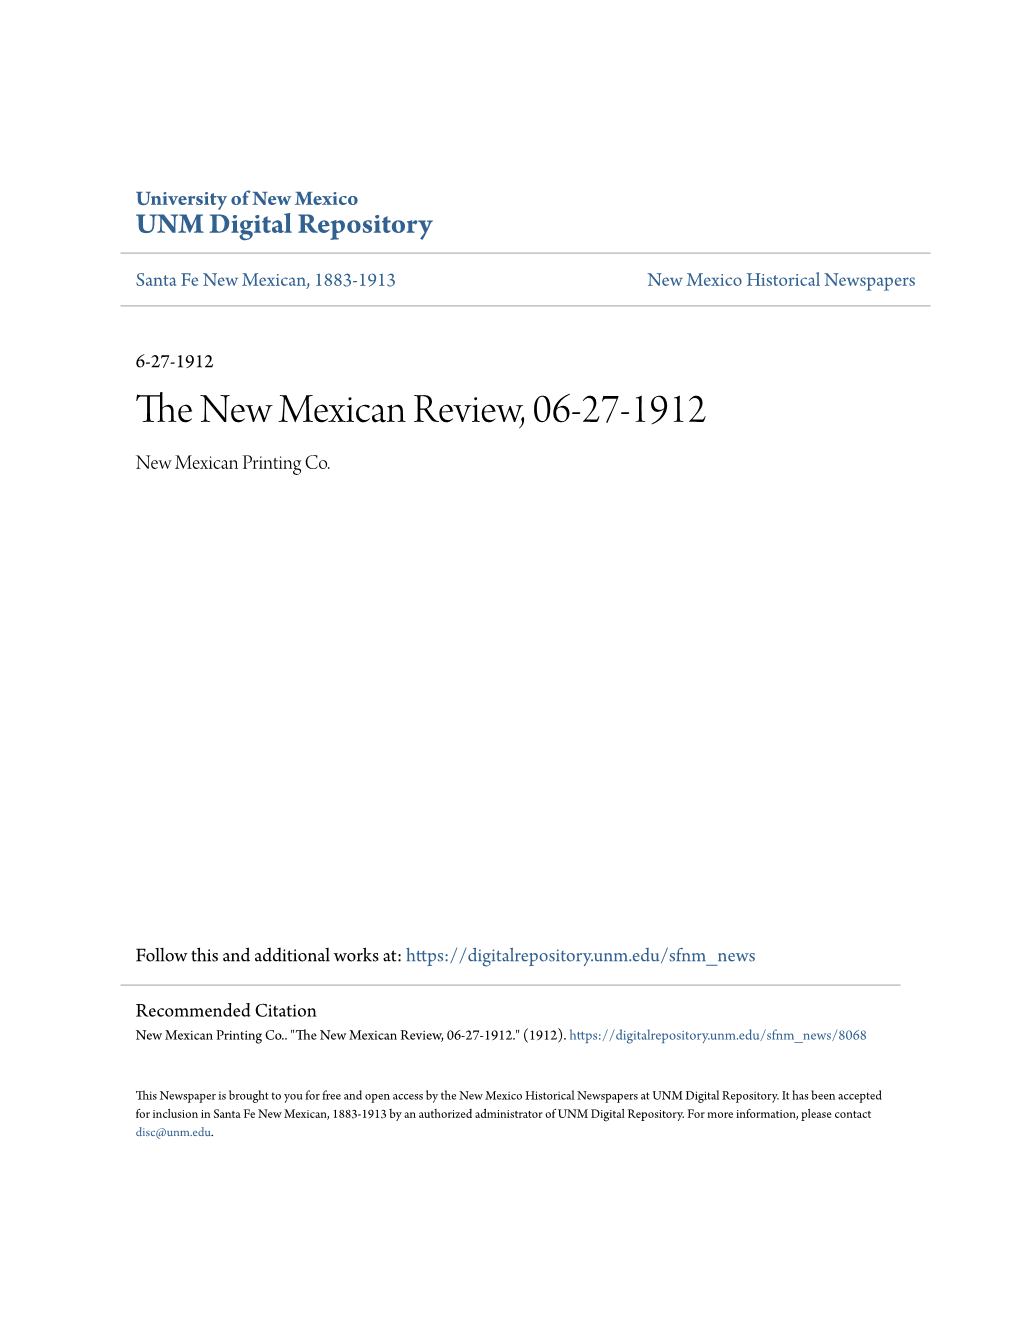 The New Mexican Review, 06-27-1912